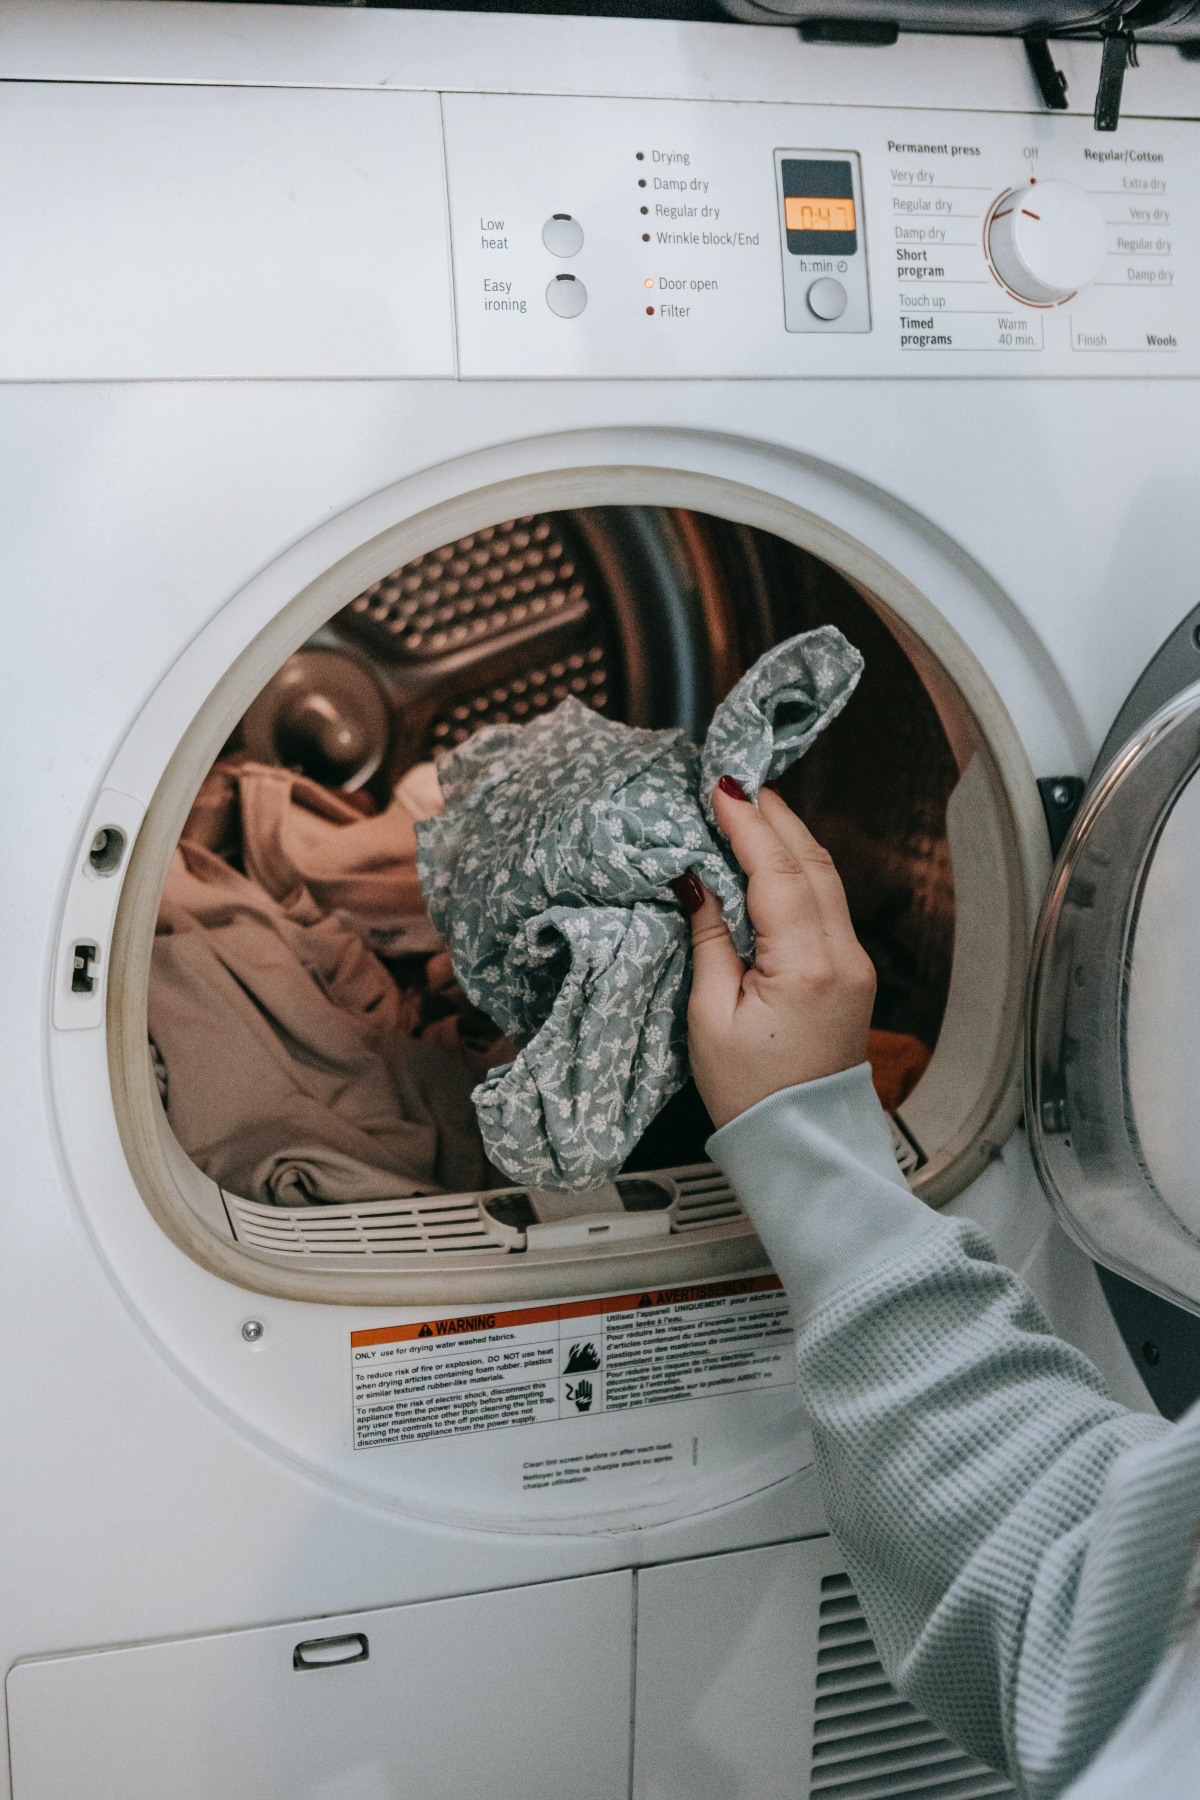 adding vinegar to laundry to remove smell